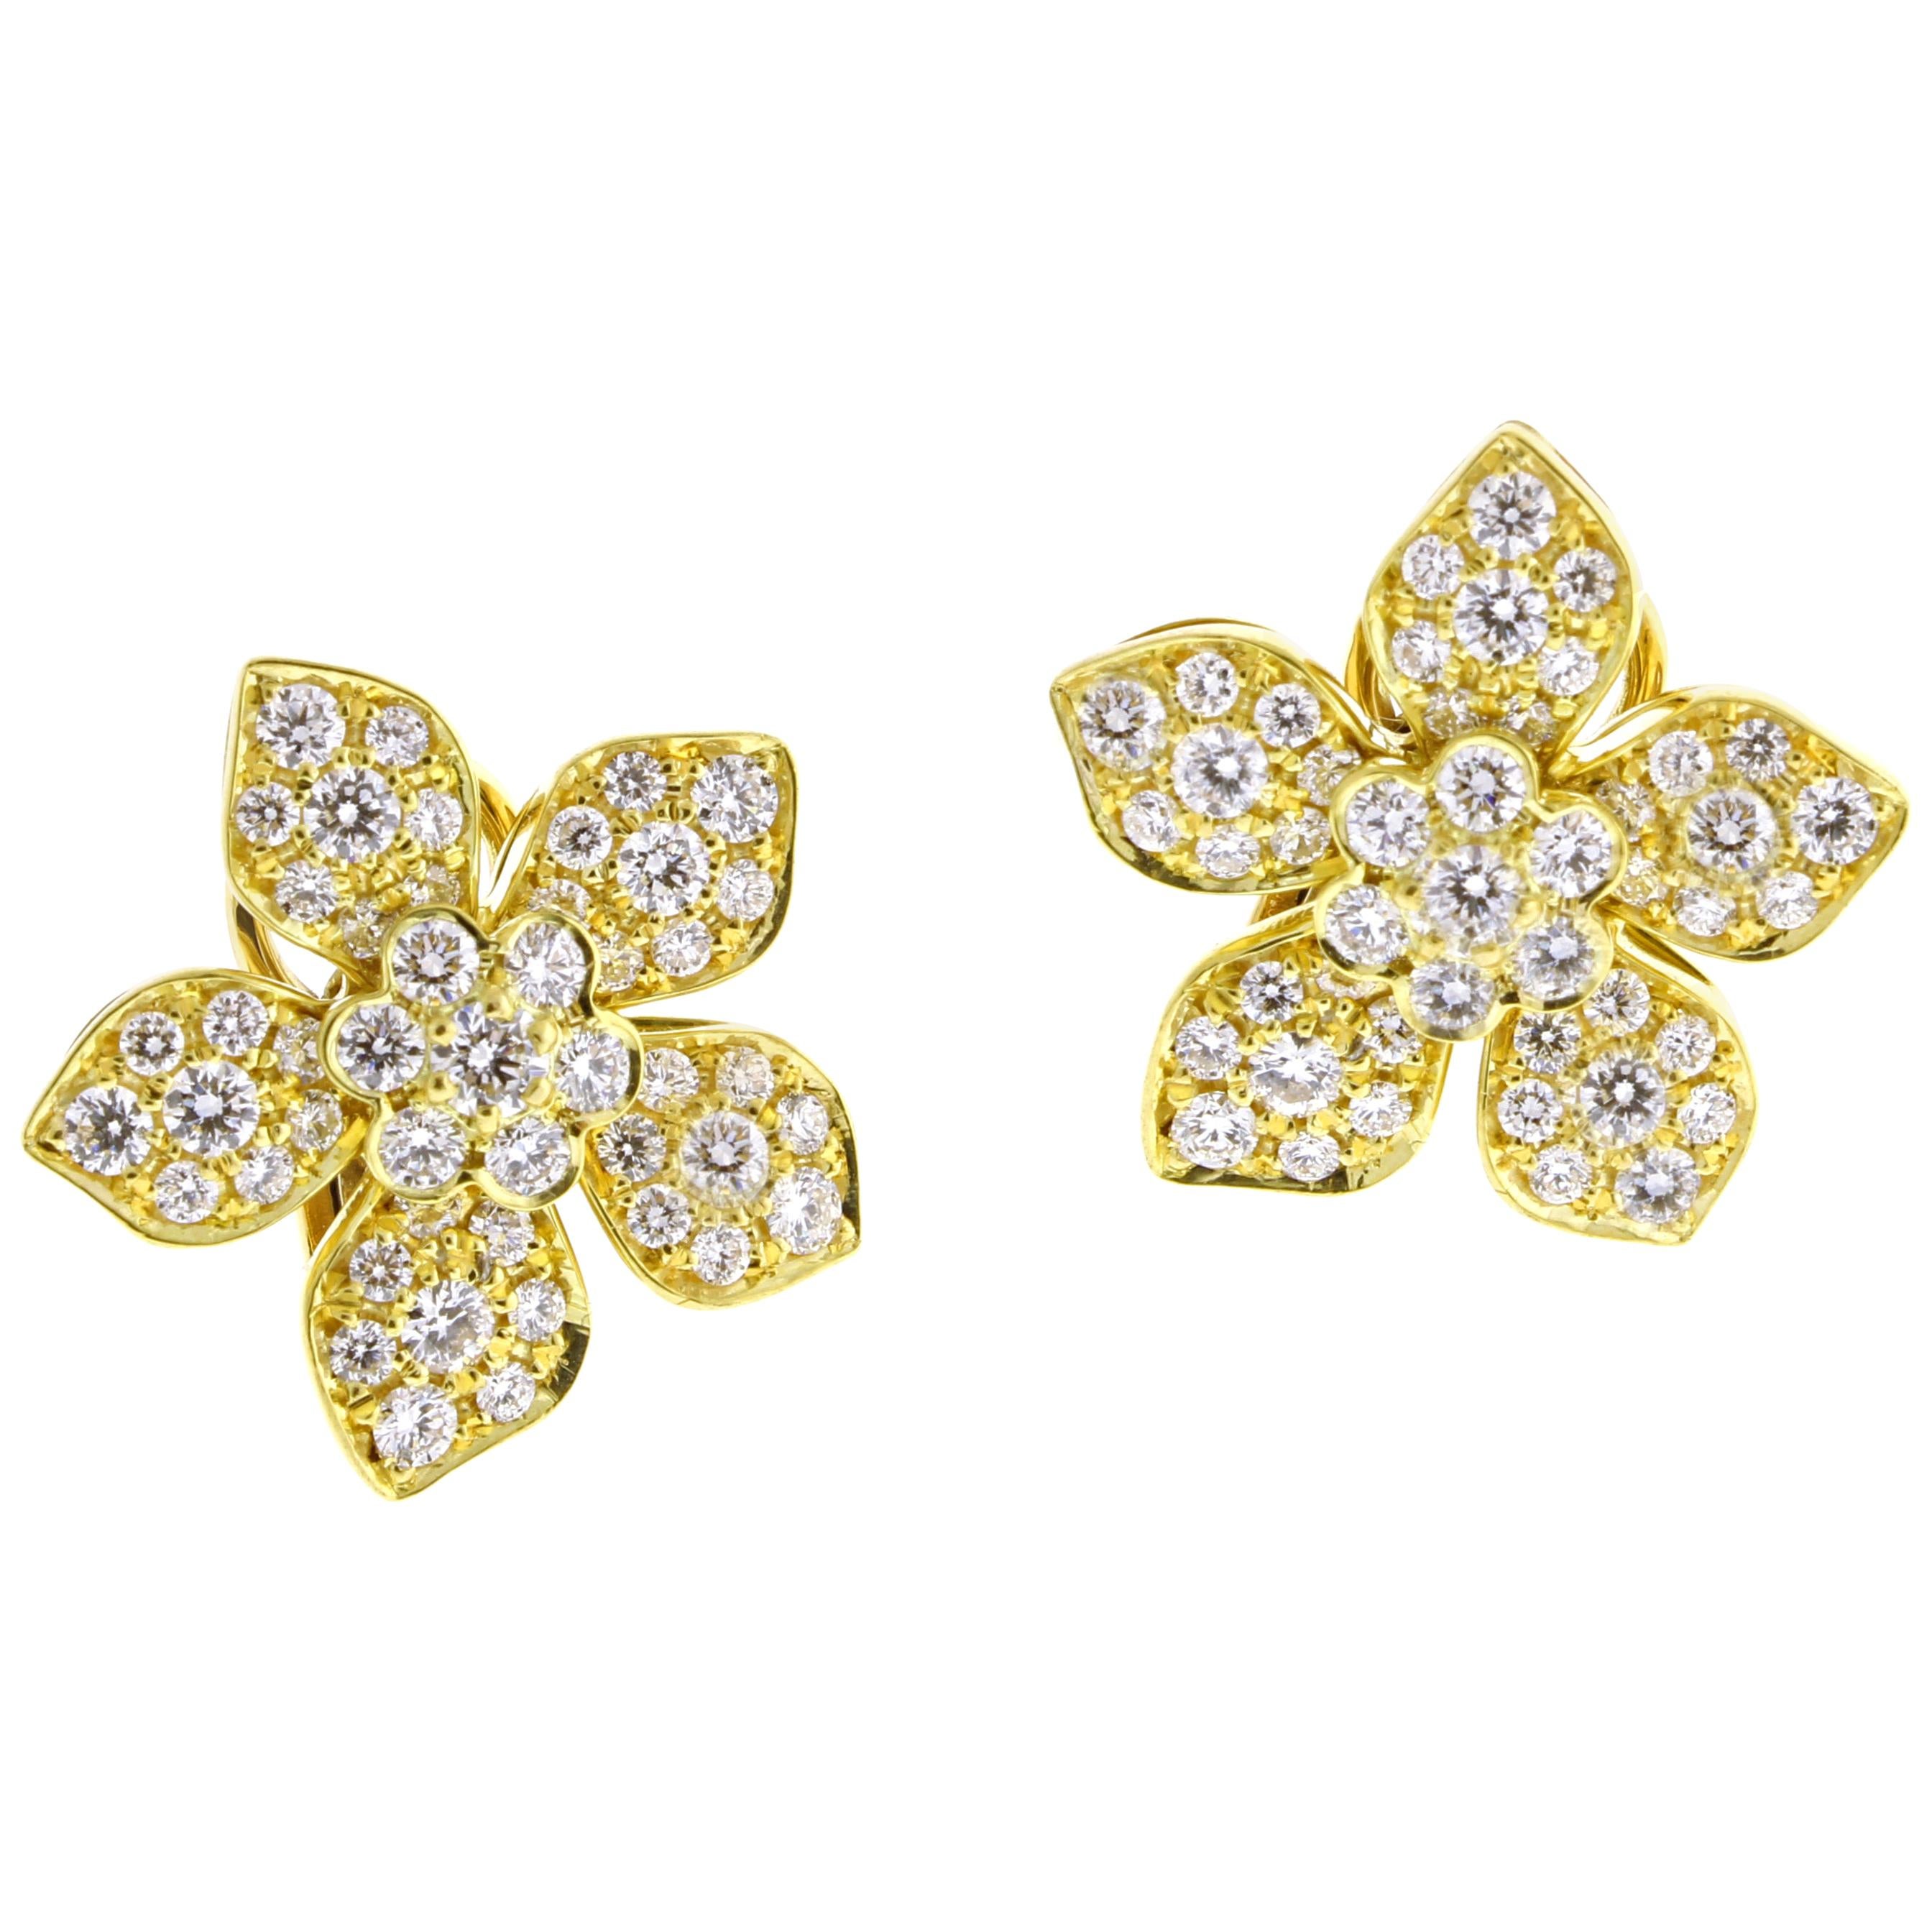 Diamond Flower Fiore Earrings by Pampillonia